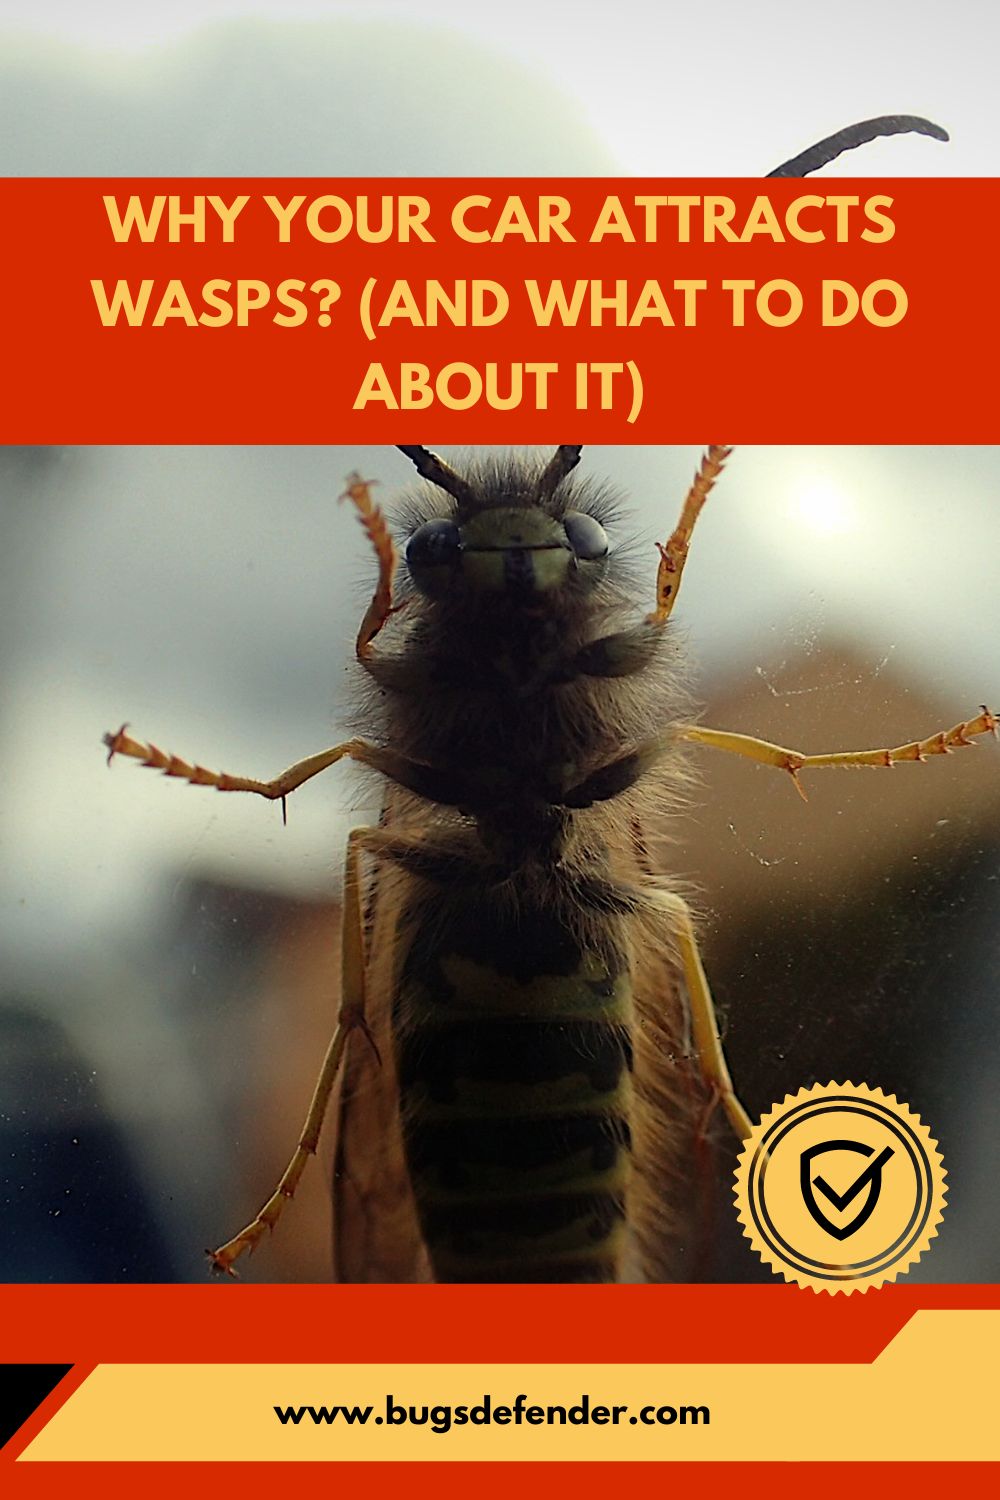 Why Your Car Attracts Wasps pin1